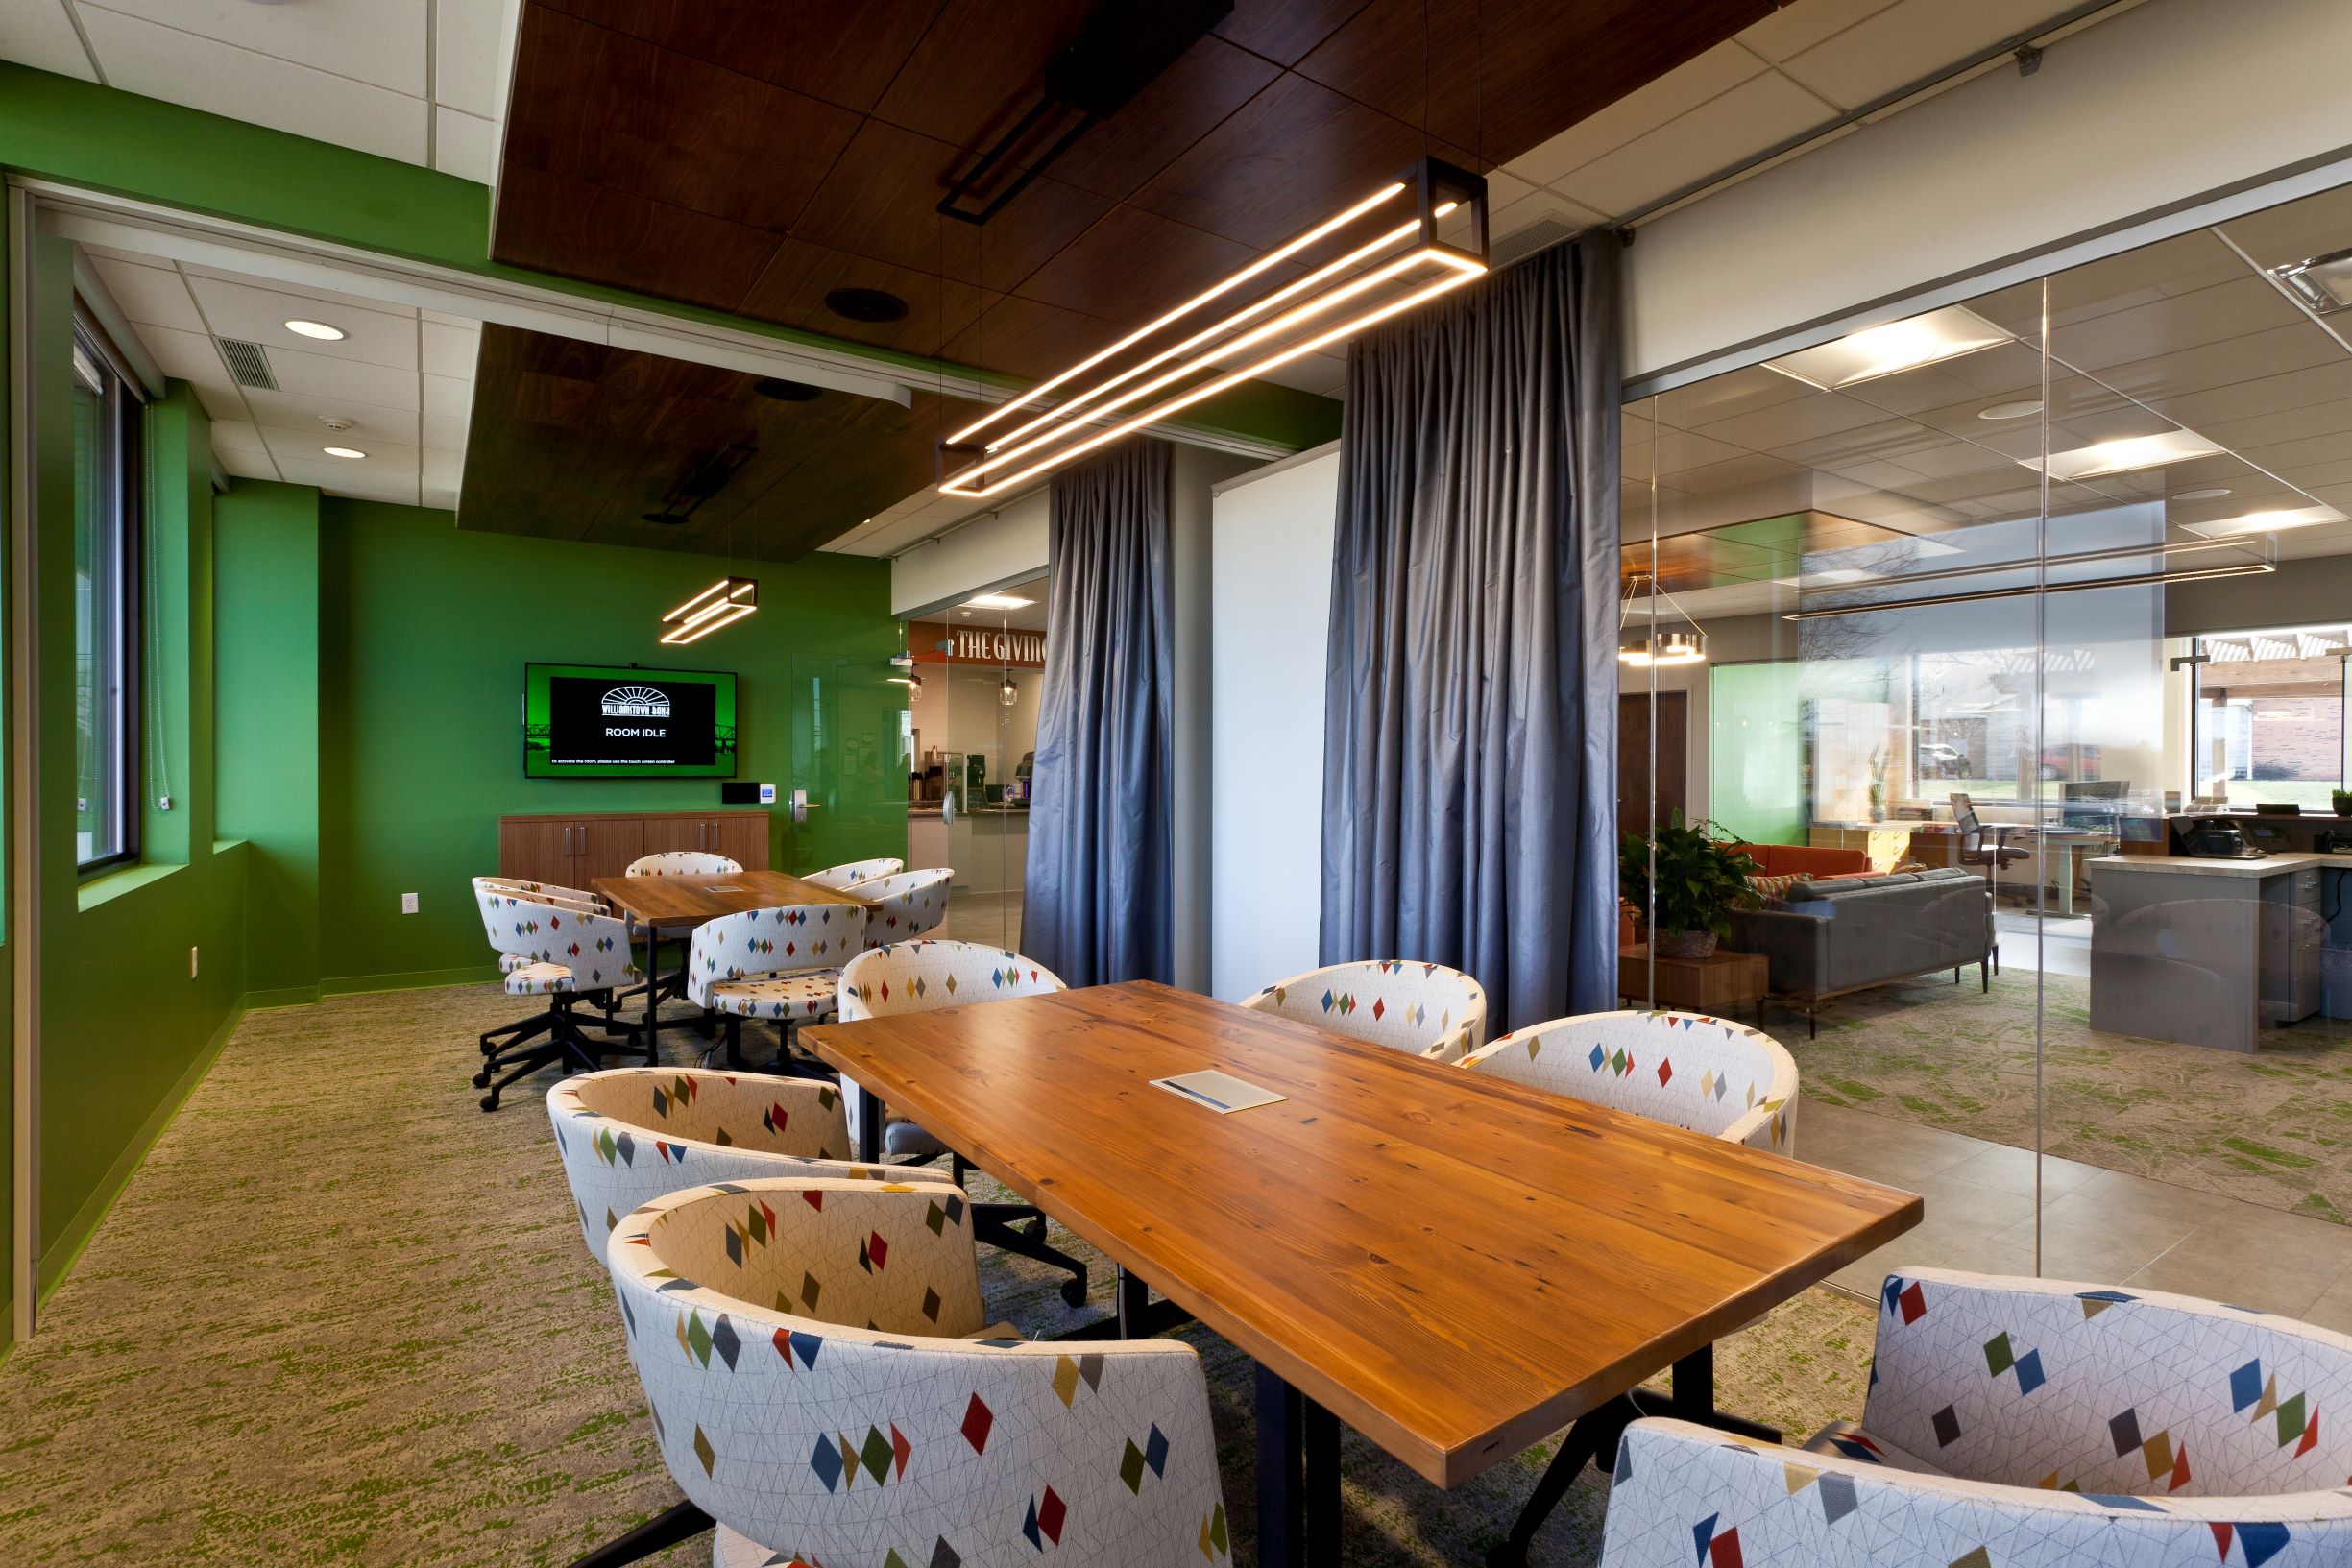 Modern conference room equipped with technology